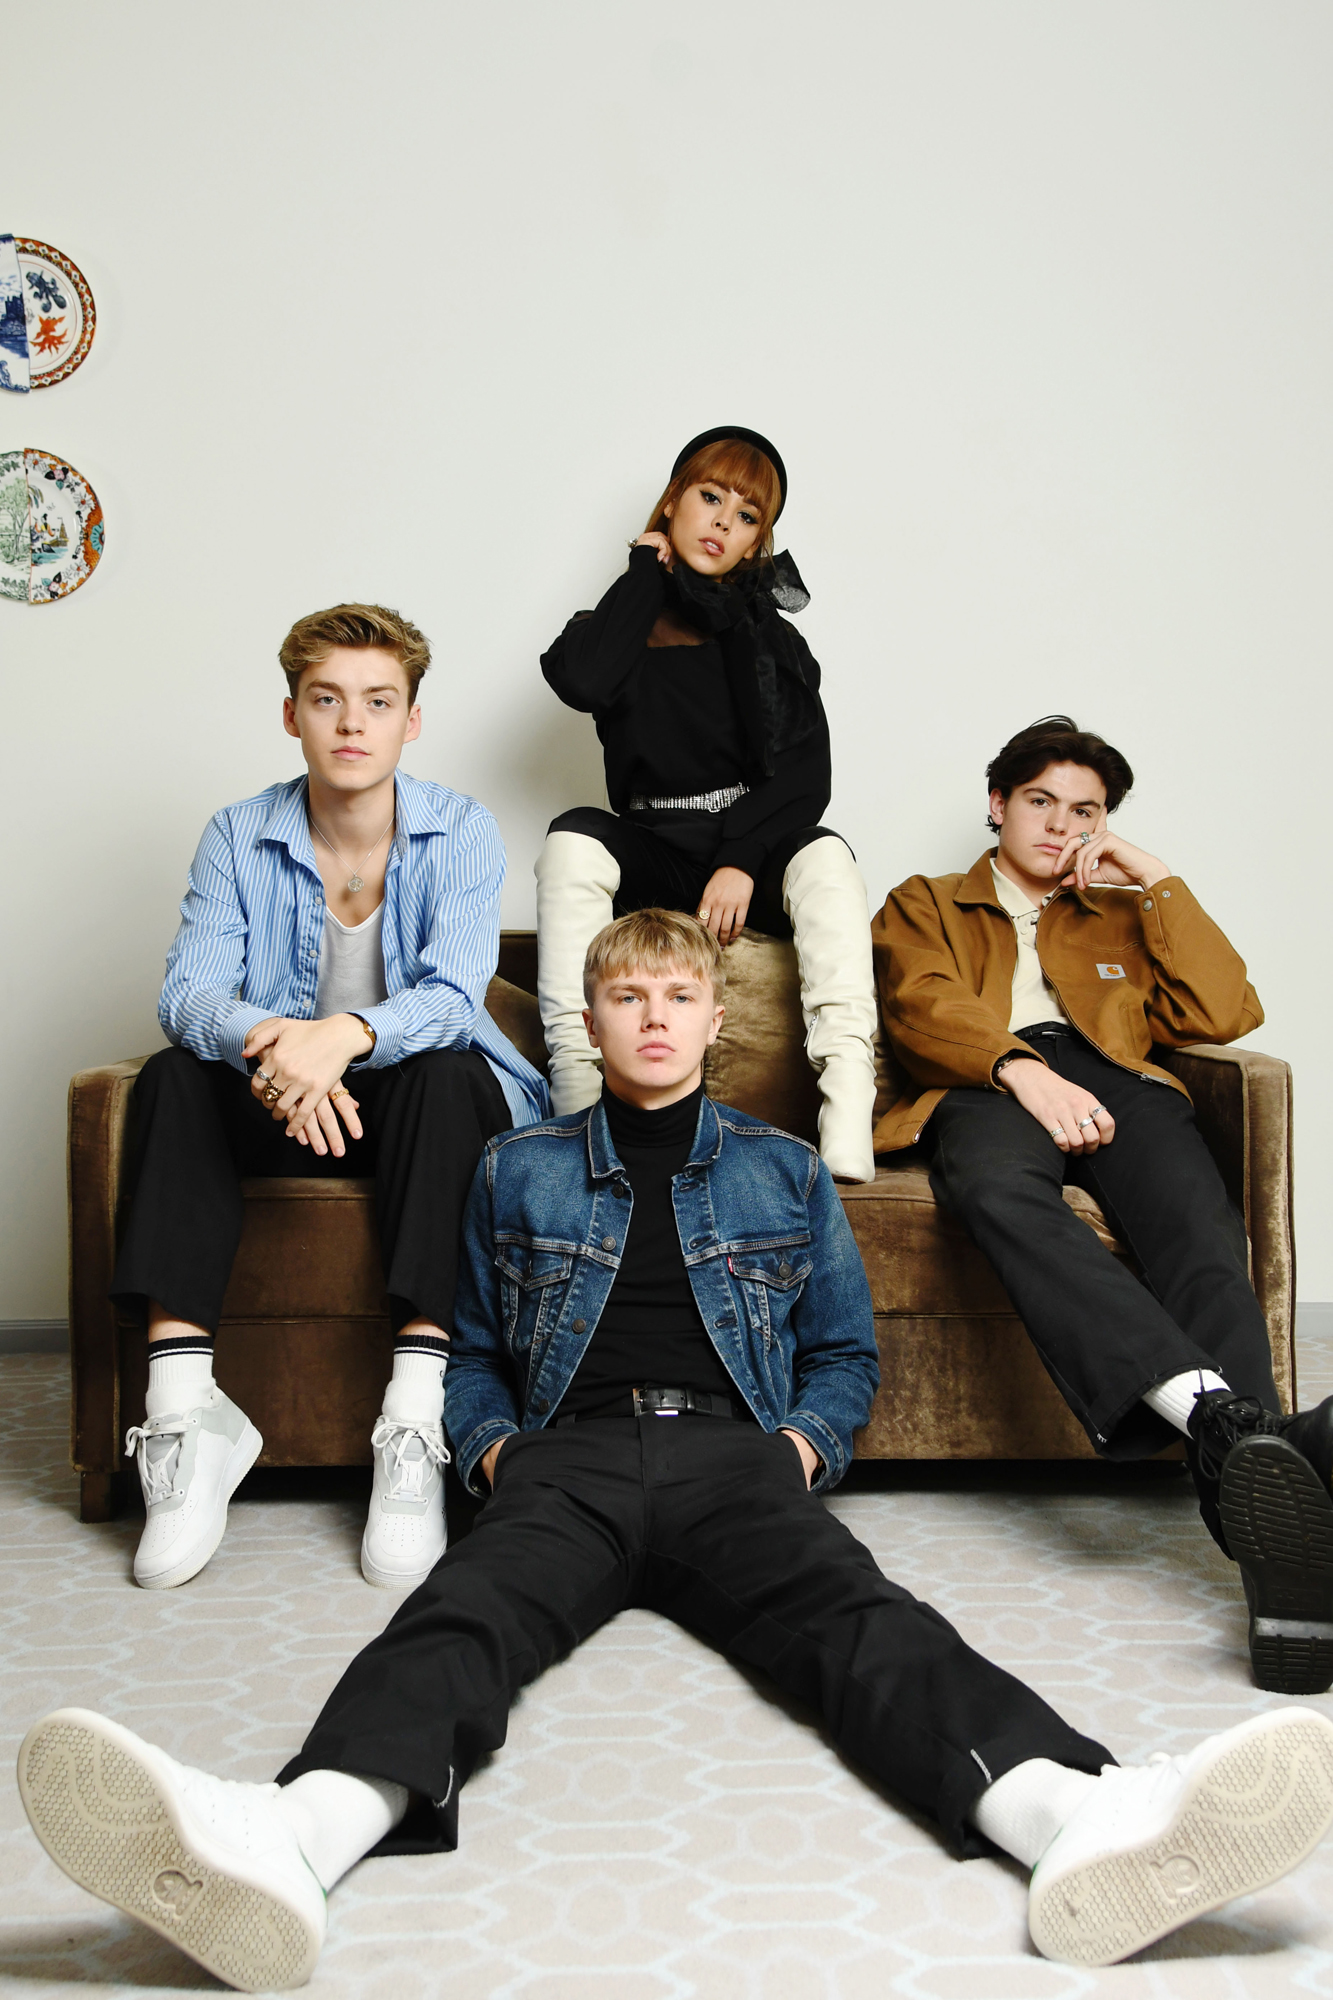 New hope club know me too well mp3 download